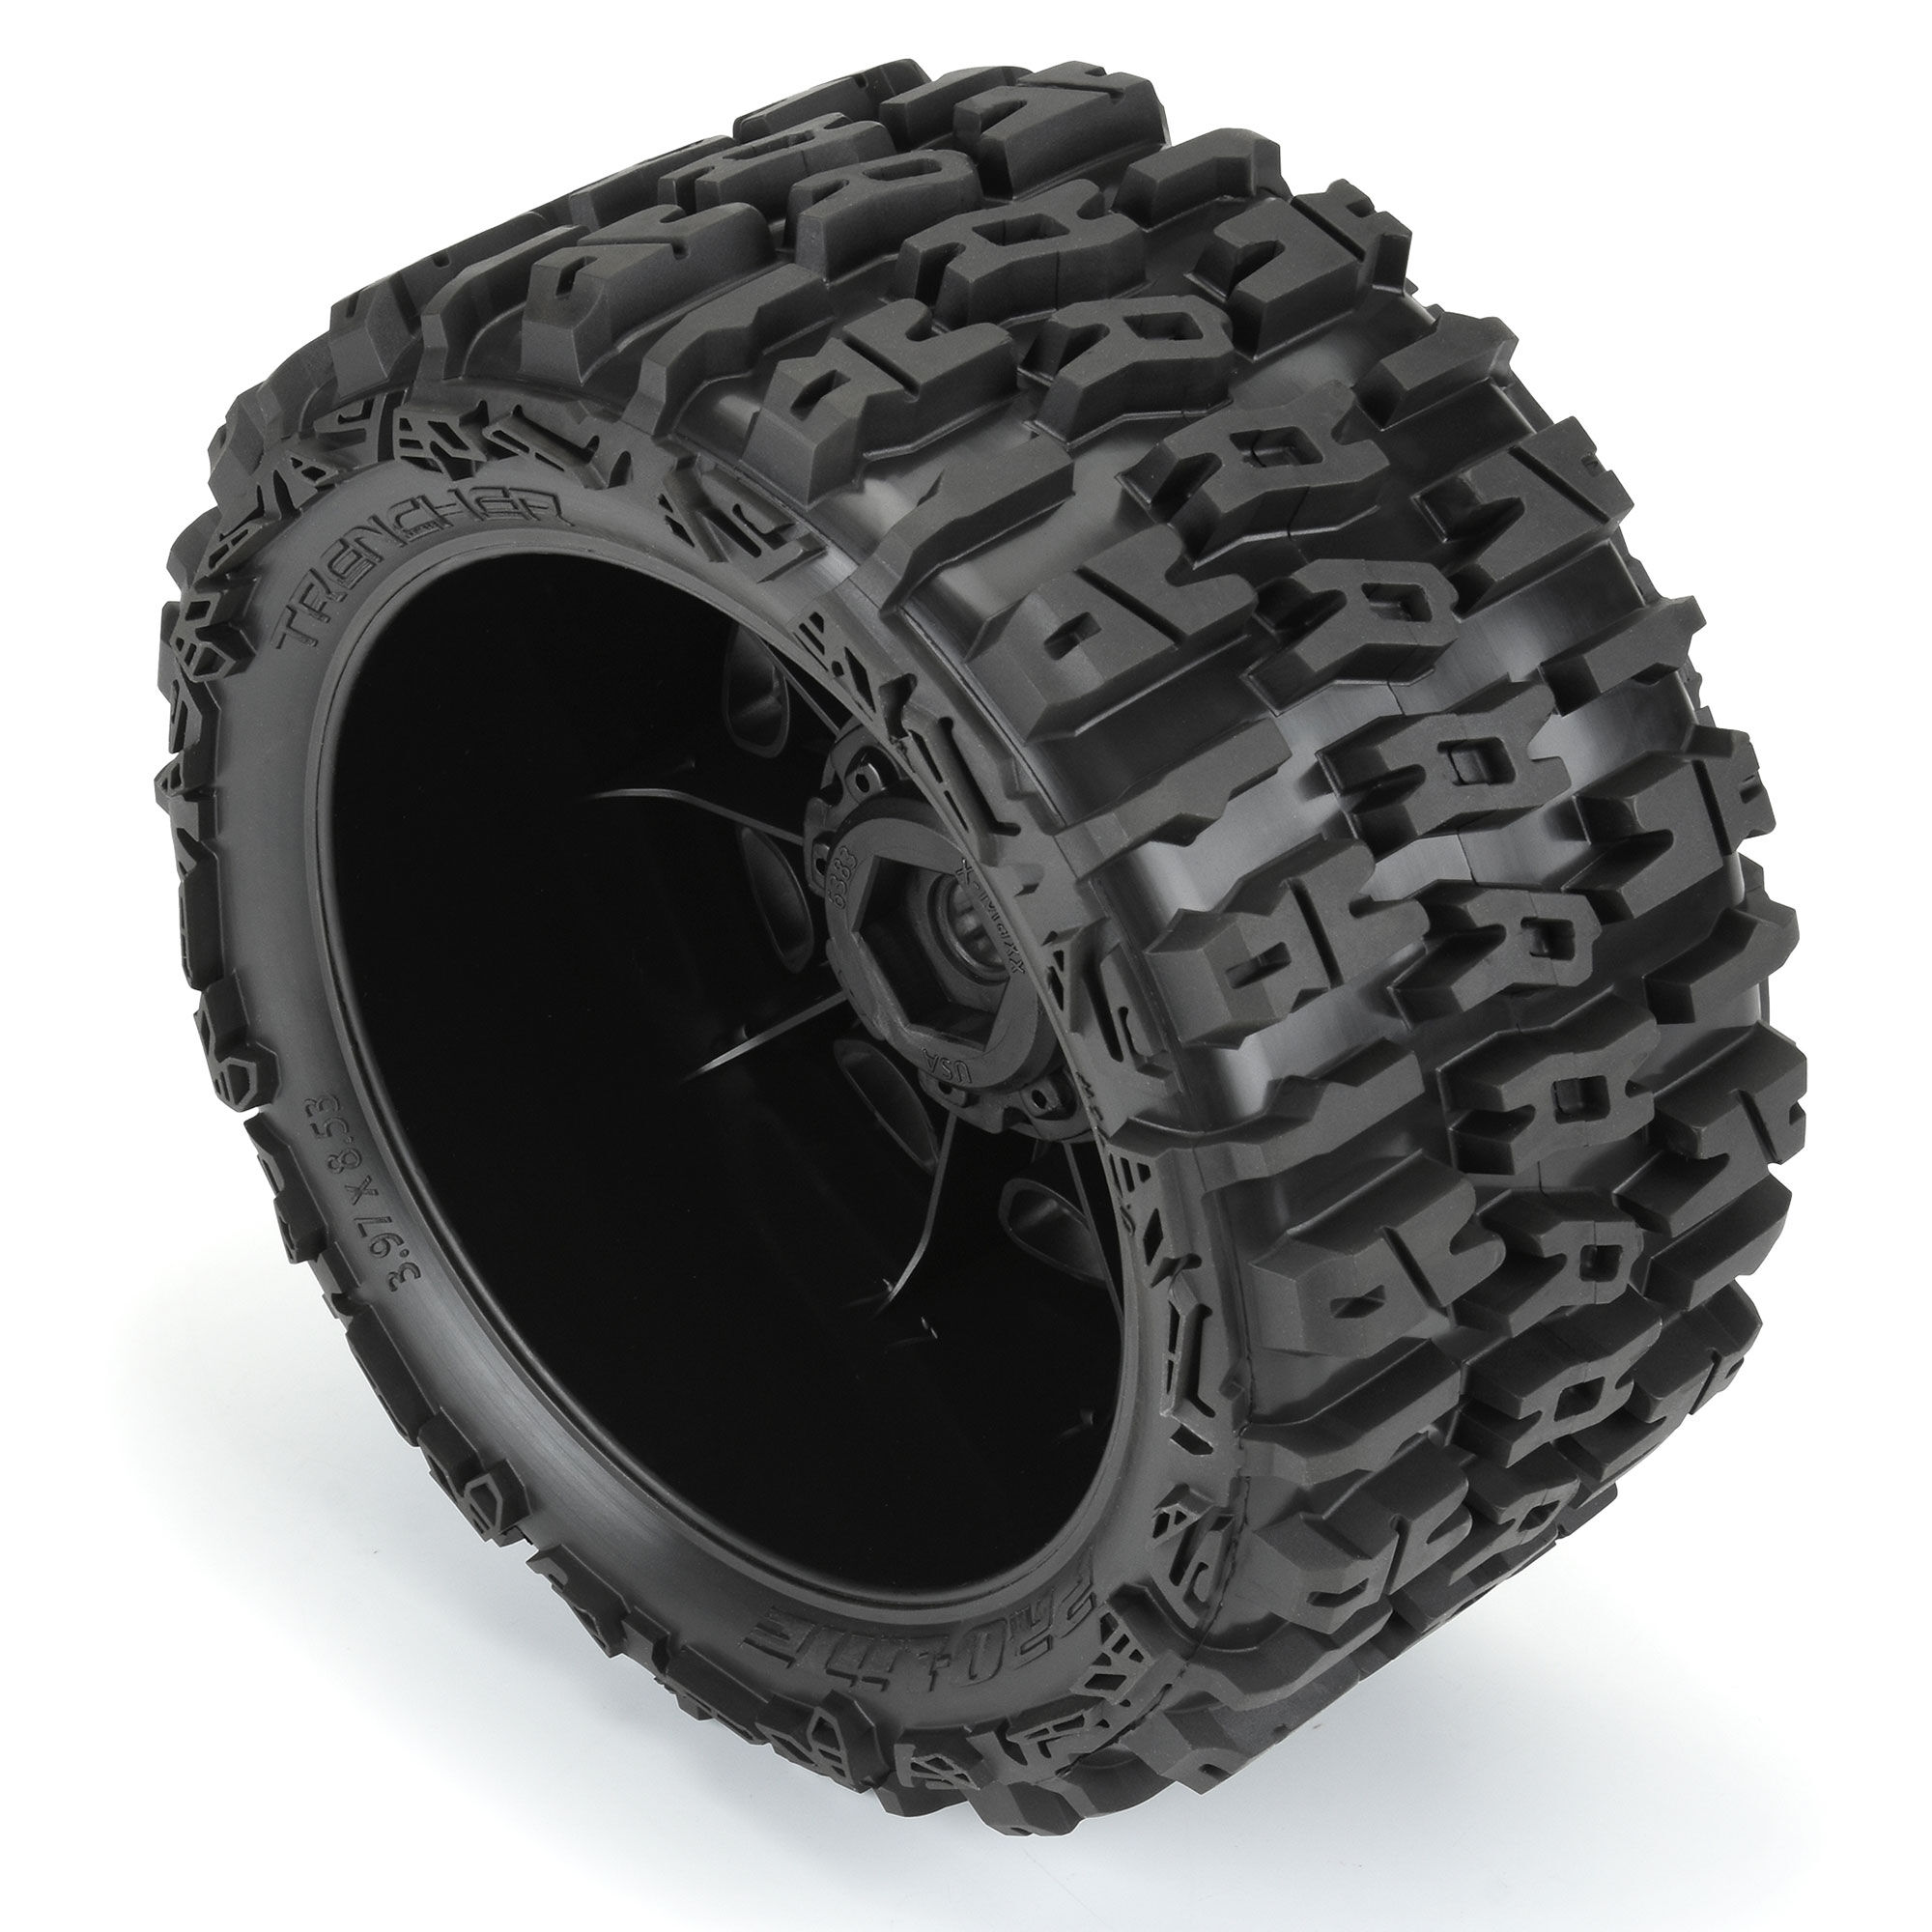 Pro-Line Racing 1/6 Trencher F/R 5.7” Tires Mounted 24mm Black 